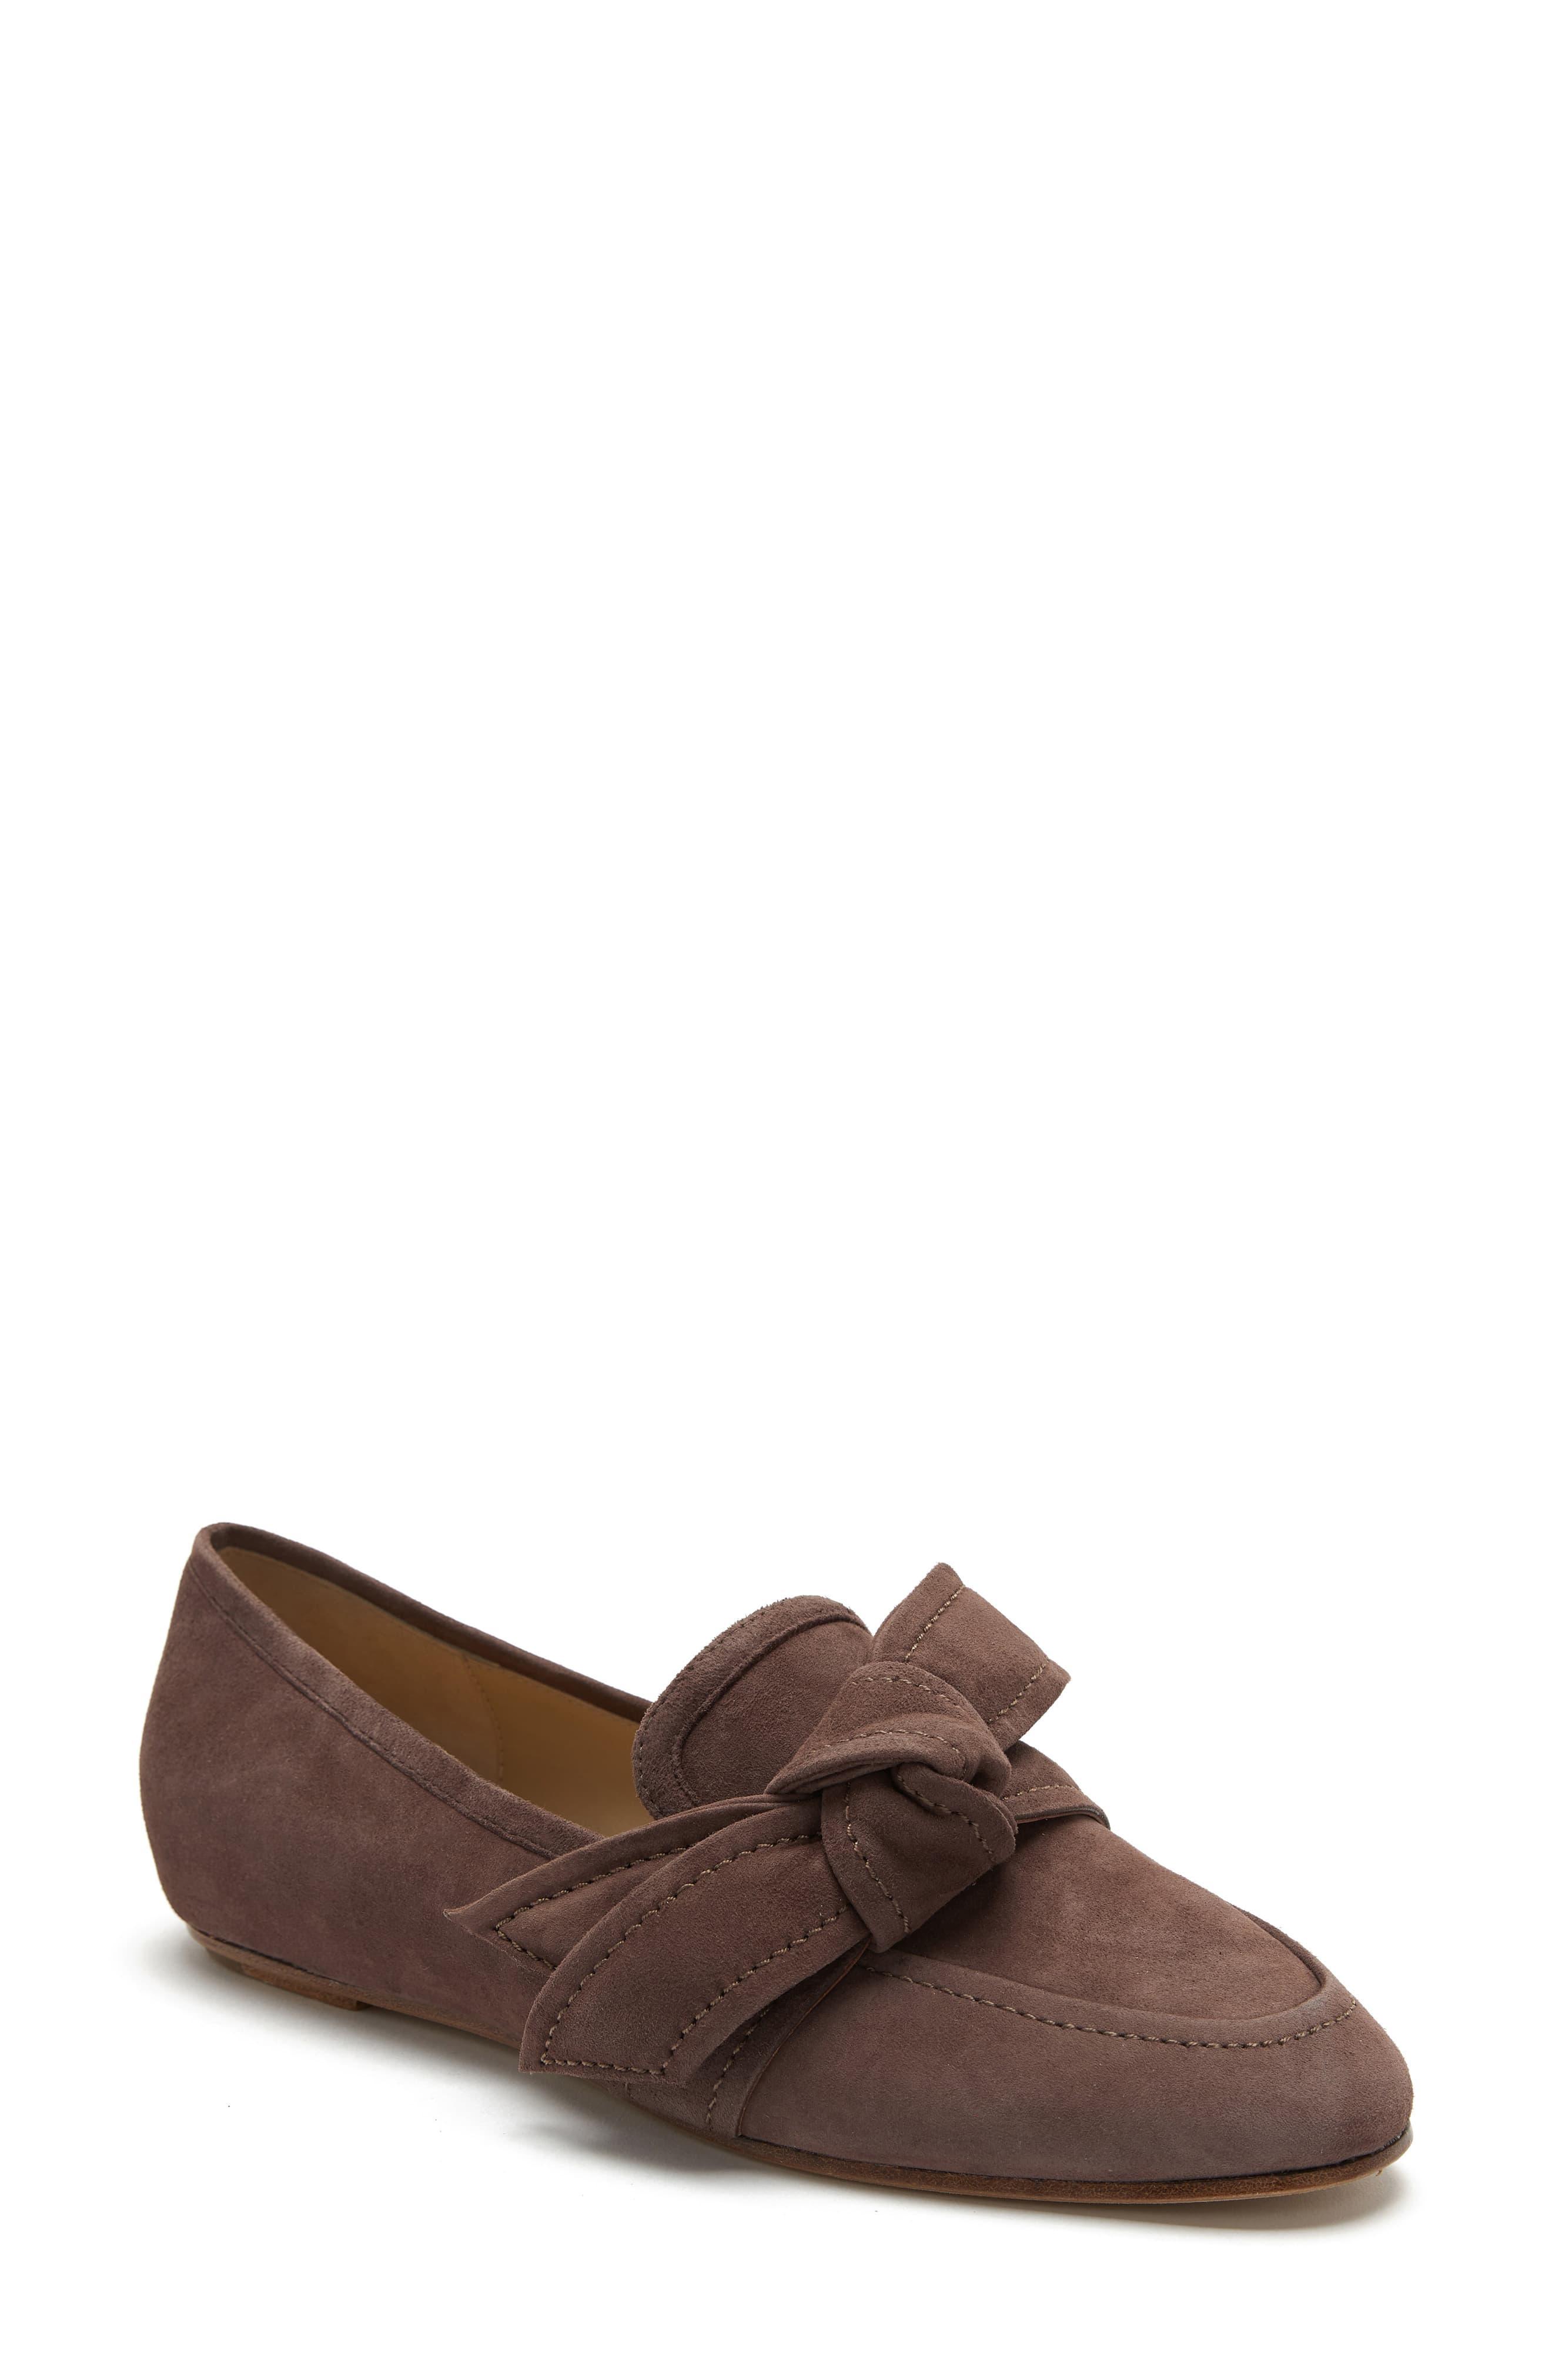 Etienne Aigner Suede Chiara Loafer in Coffee Brown Suede (Brown) - Save ...